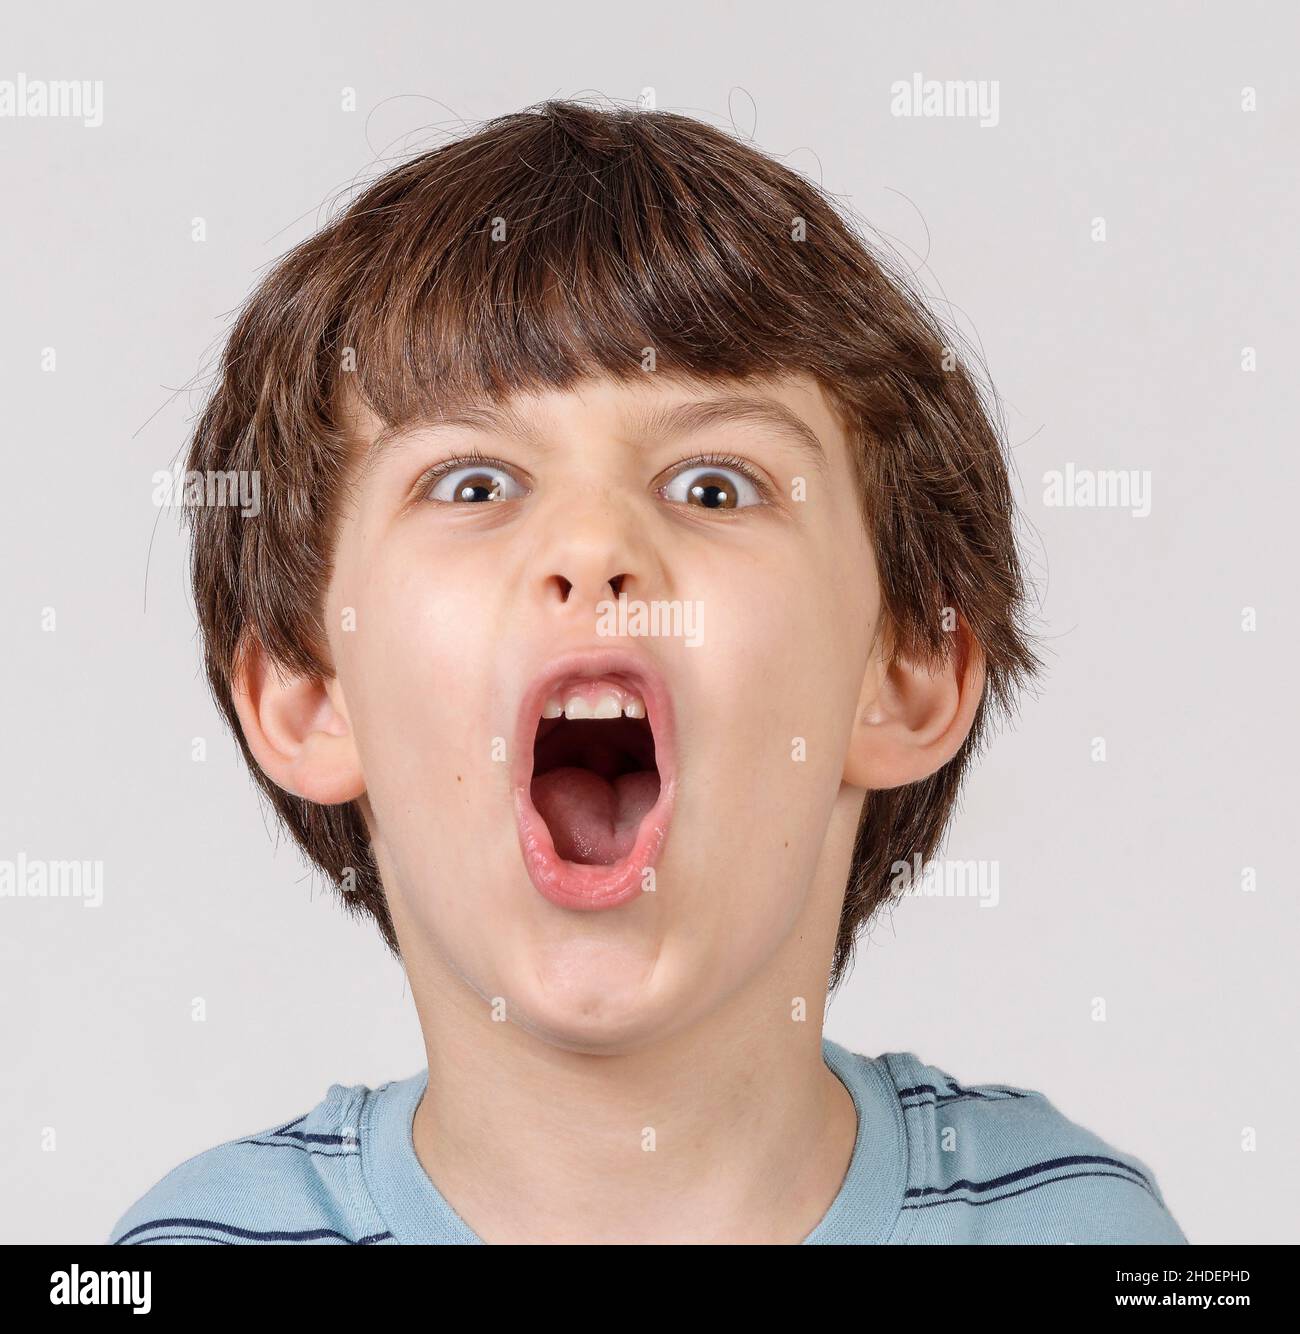 Young boy of six pulling faces Model releases Stock Photo